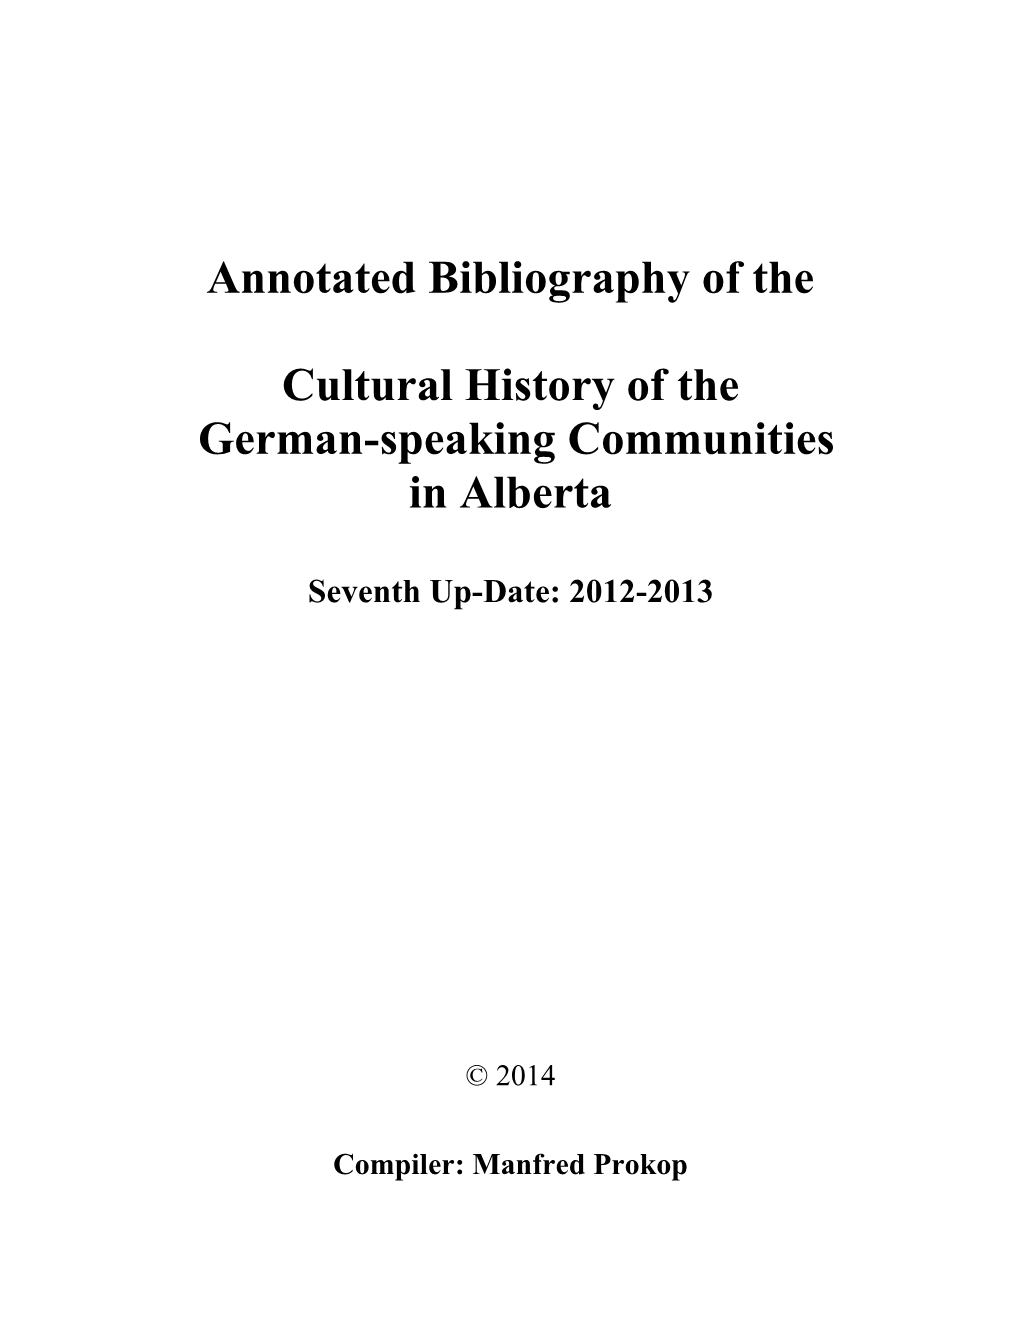 Annotated Bibliography of The